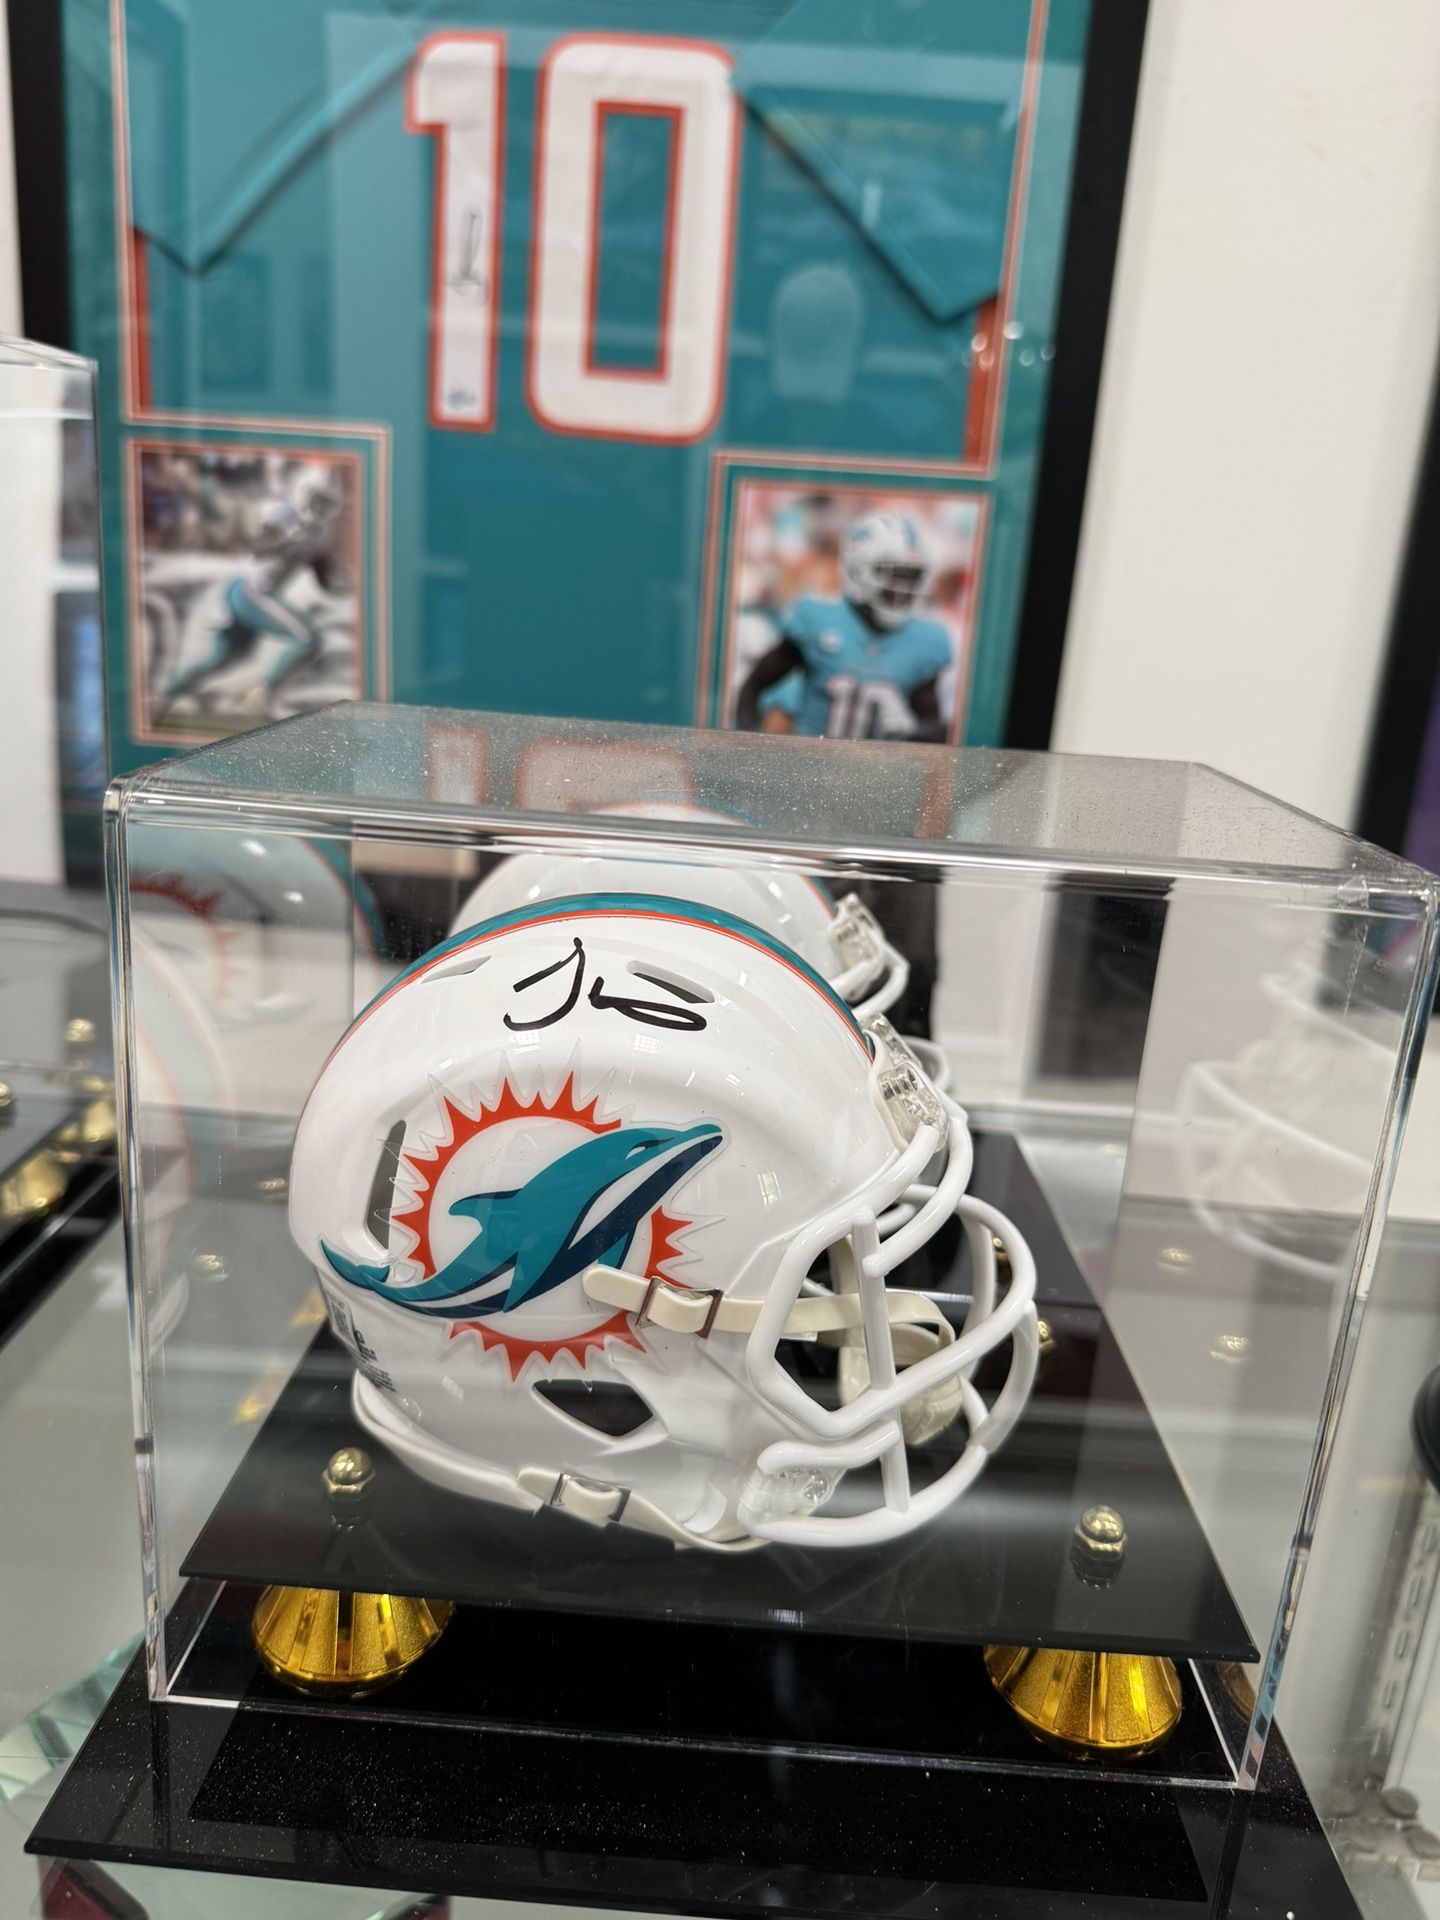 Autographed Tyreek Hill Miami Dolphins Mini Helmet - Beckett Authenticated